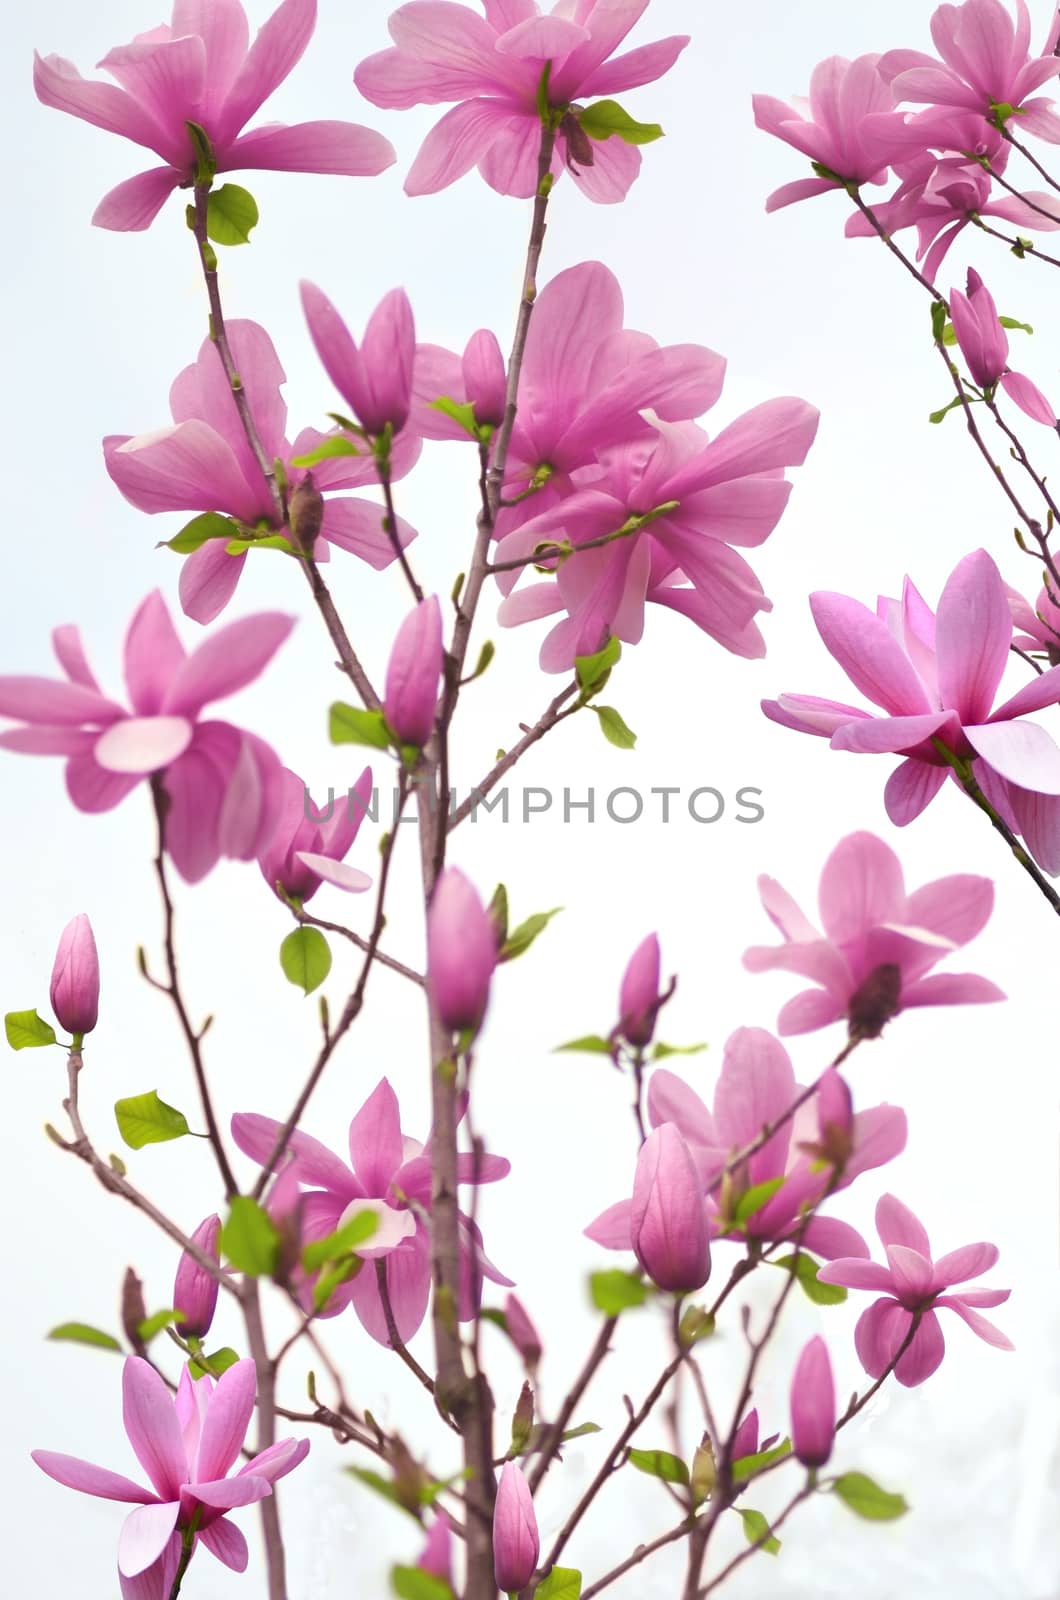 Blooming Magnolia tree on white background.